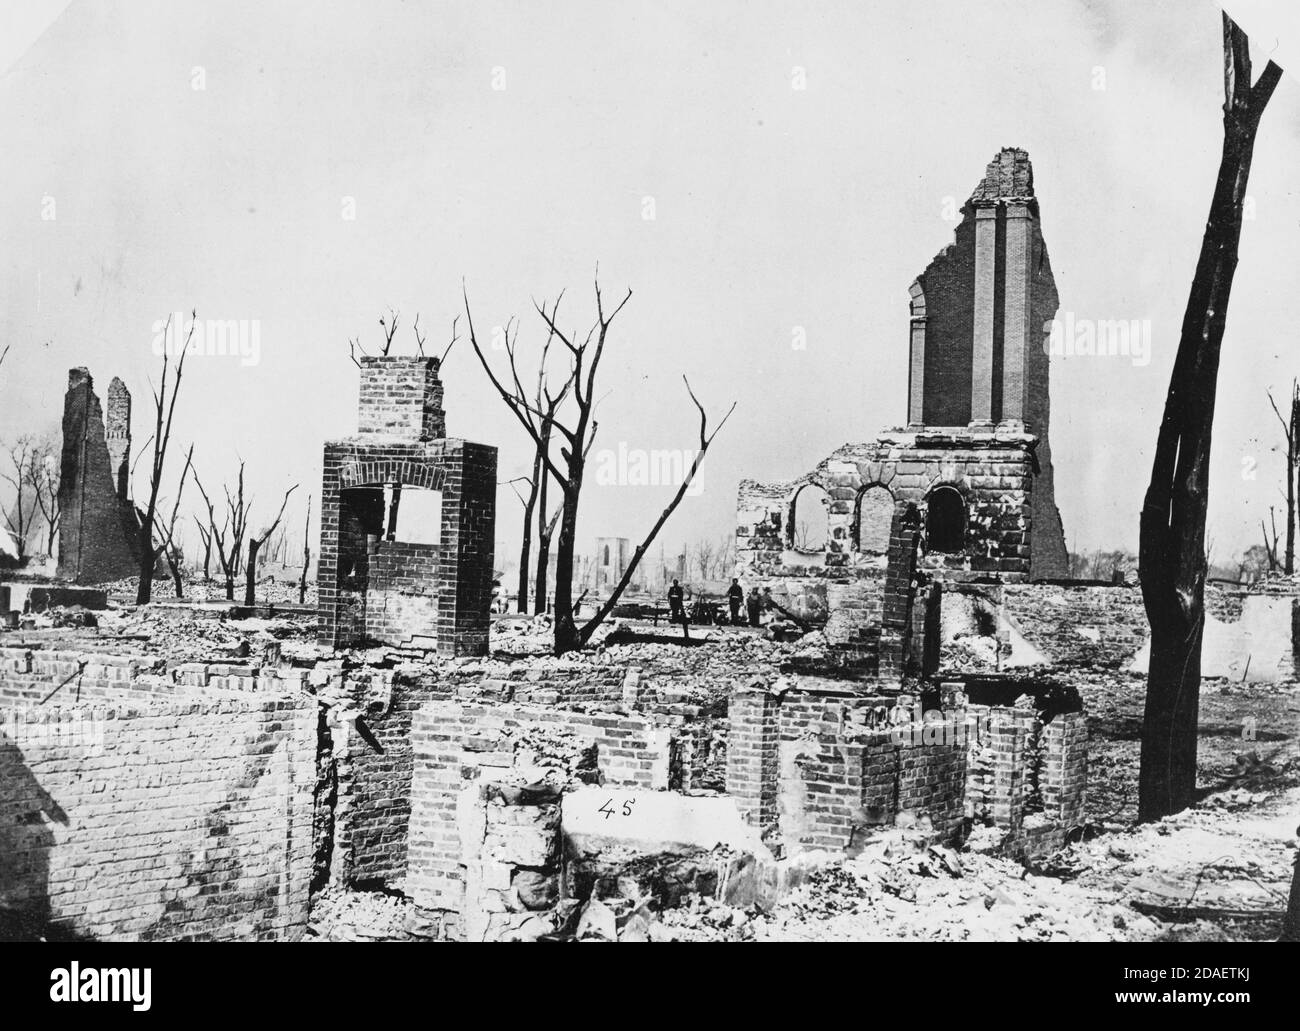 Ruins of the Chicago Historical Society library building after the Chicago Fire of 1871, Chicago, Illinois. Stock Photo